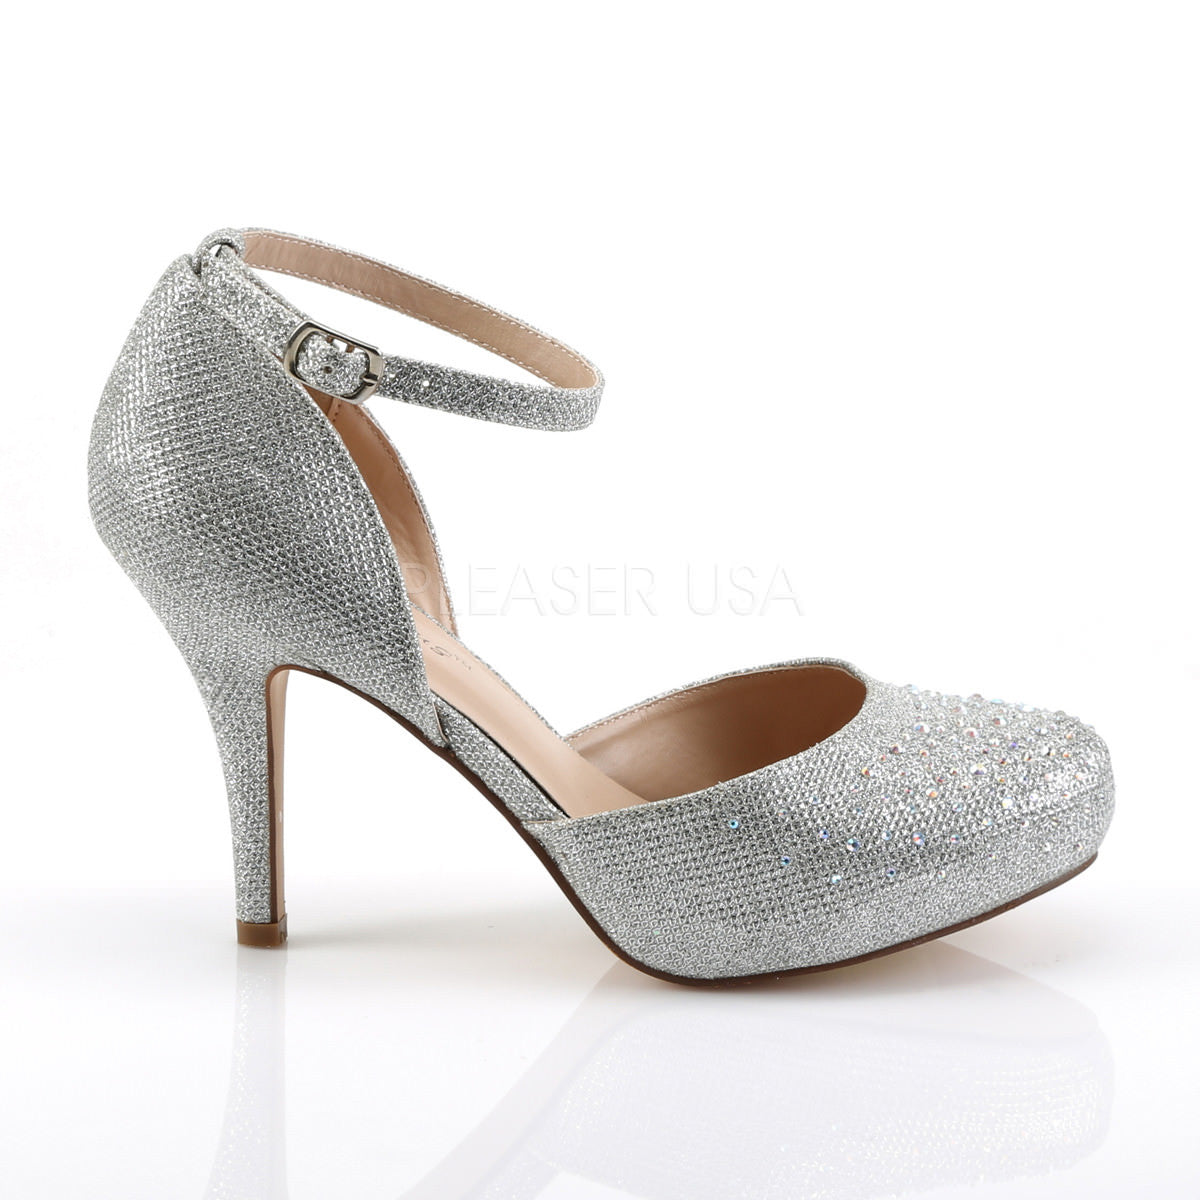 Fabulicious COVET-03 Silver Glitter Mesh Fabric Ankle Strap Pumps with Rhinestones